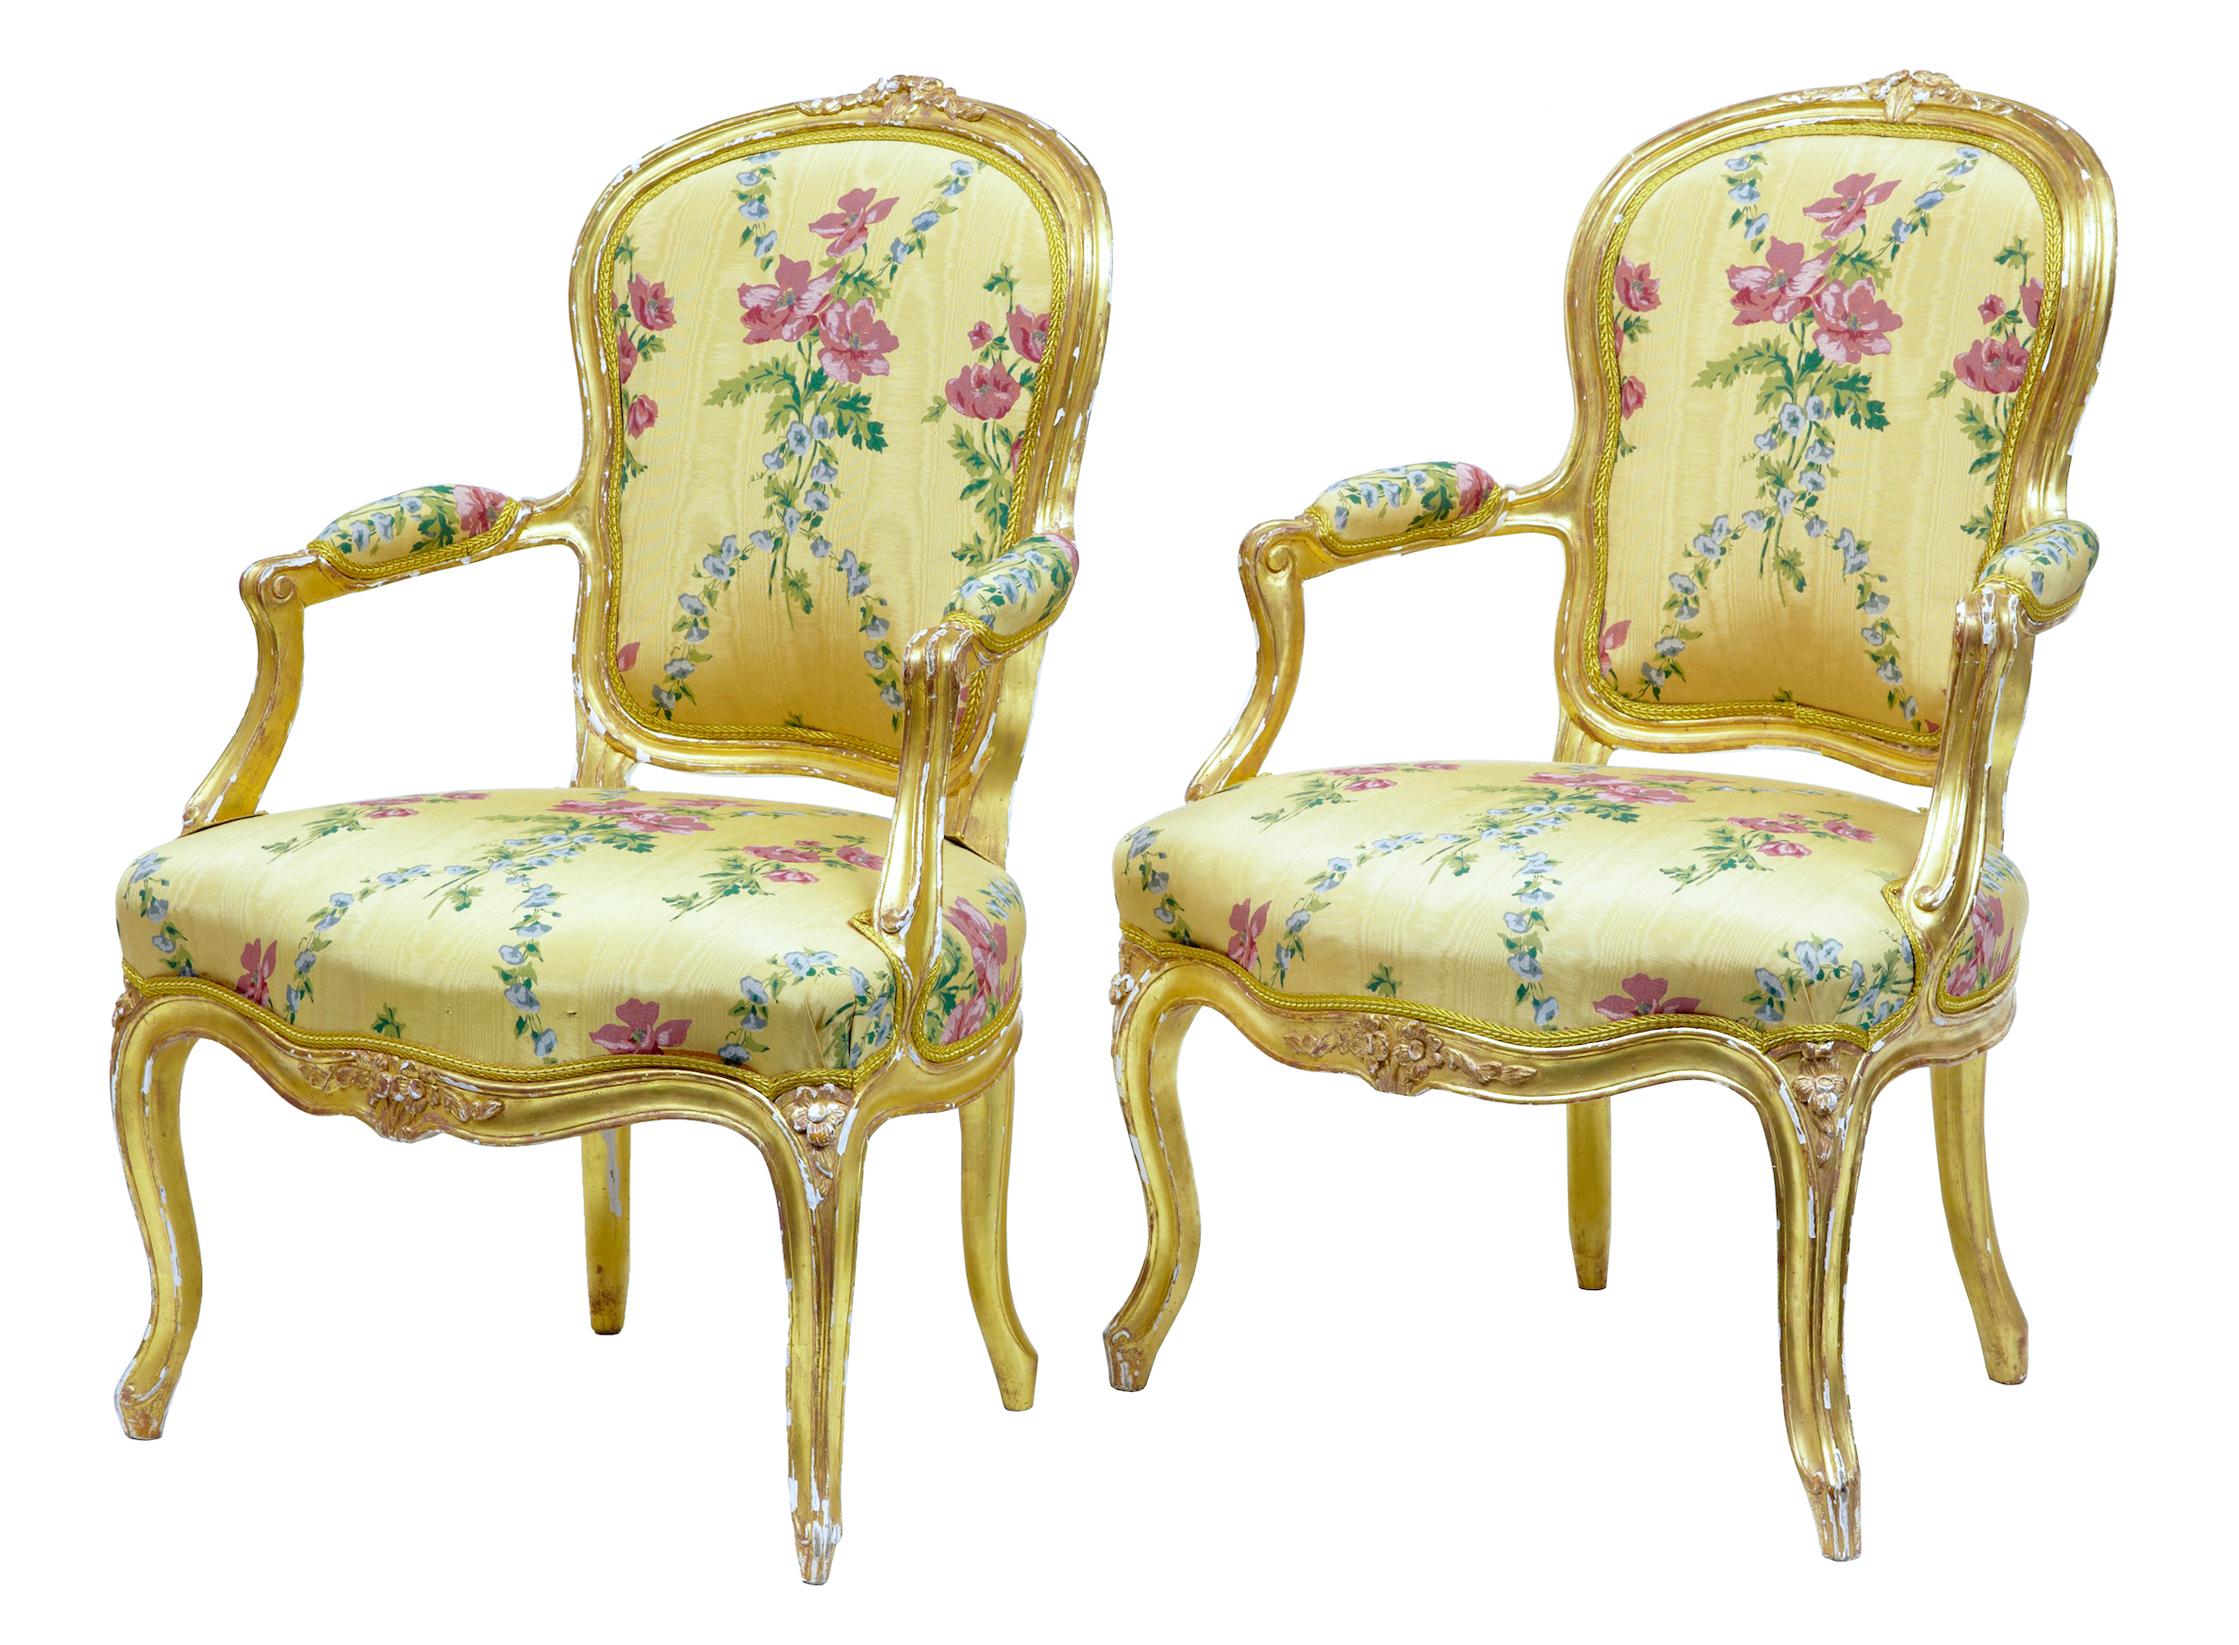 Near pair of 18th century Louis XV gilt armchairs by Michard, circa 1770.

Fine pair of Classic fauteuil armchairs. Carved shaped backs, scrolled arms, further carved detail to frieze and top of legs. 1 chair stamped 'michard'

Upholstered in